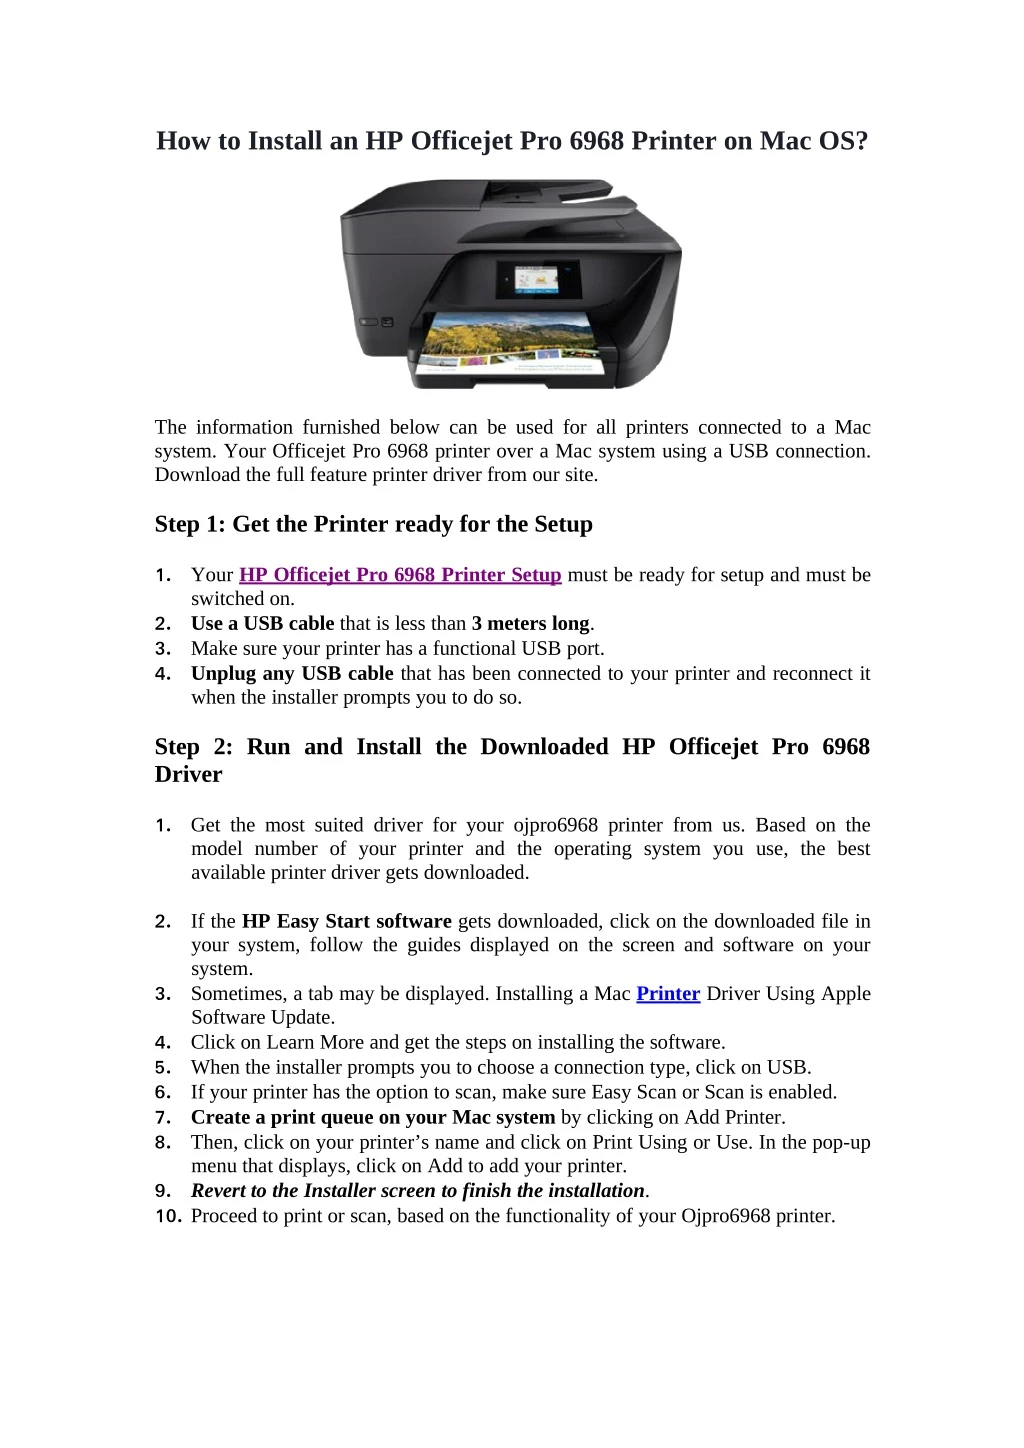 how to install an hp officejet pro 6968 printer